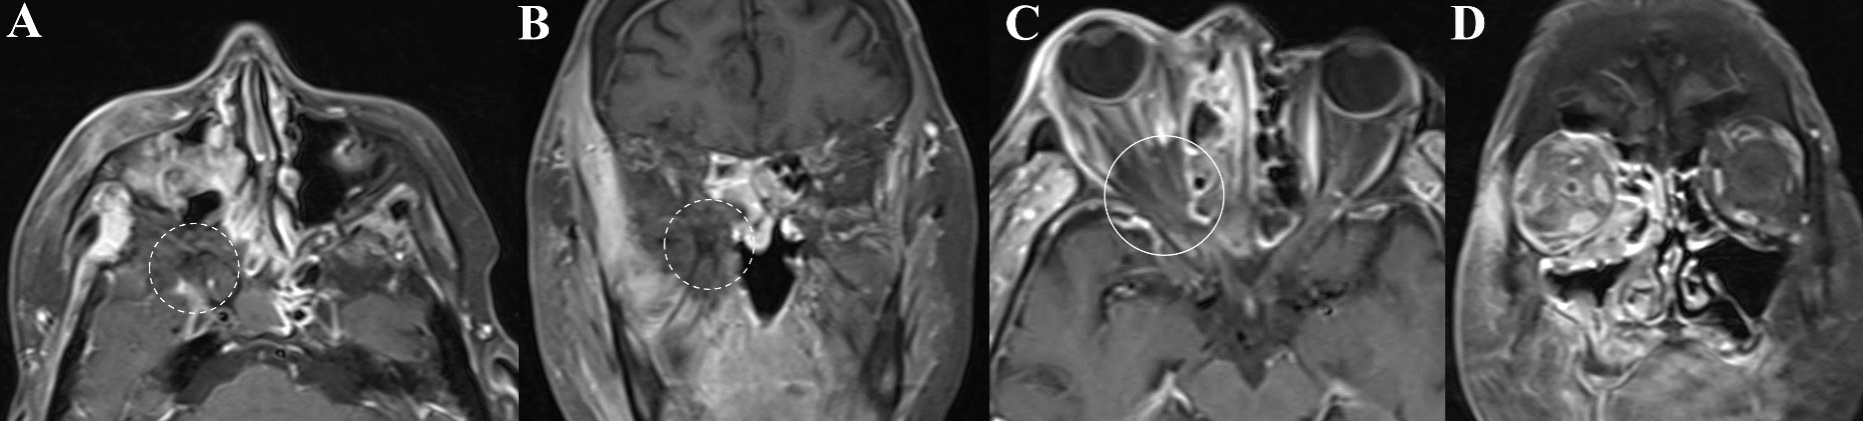 Radiological differentiation between bacterial orbital cellulitis and invasive fungal sino-orbital infections